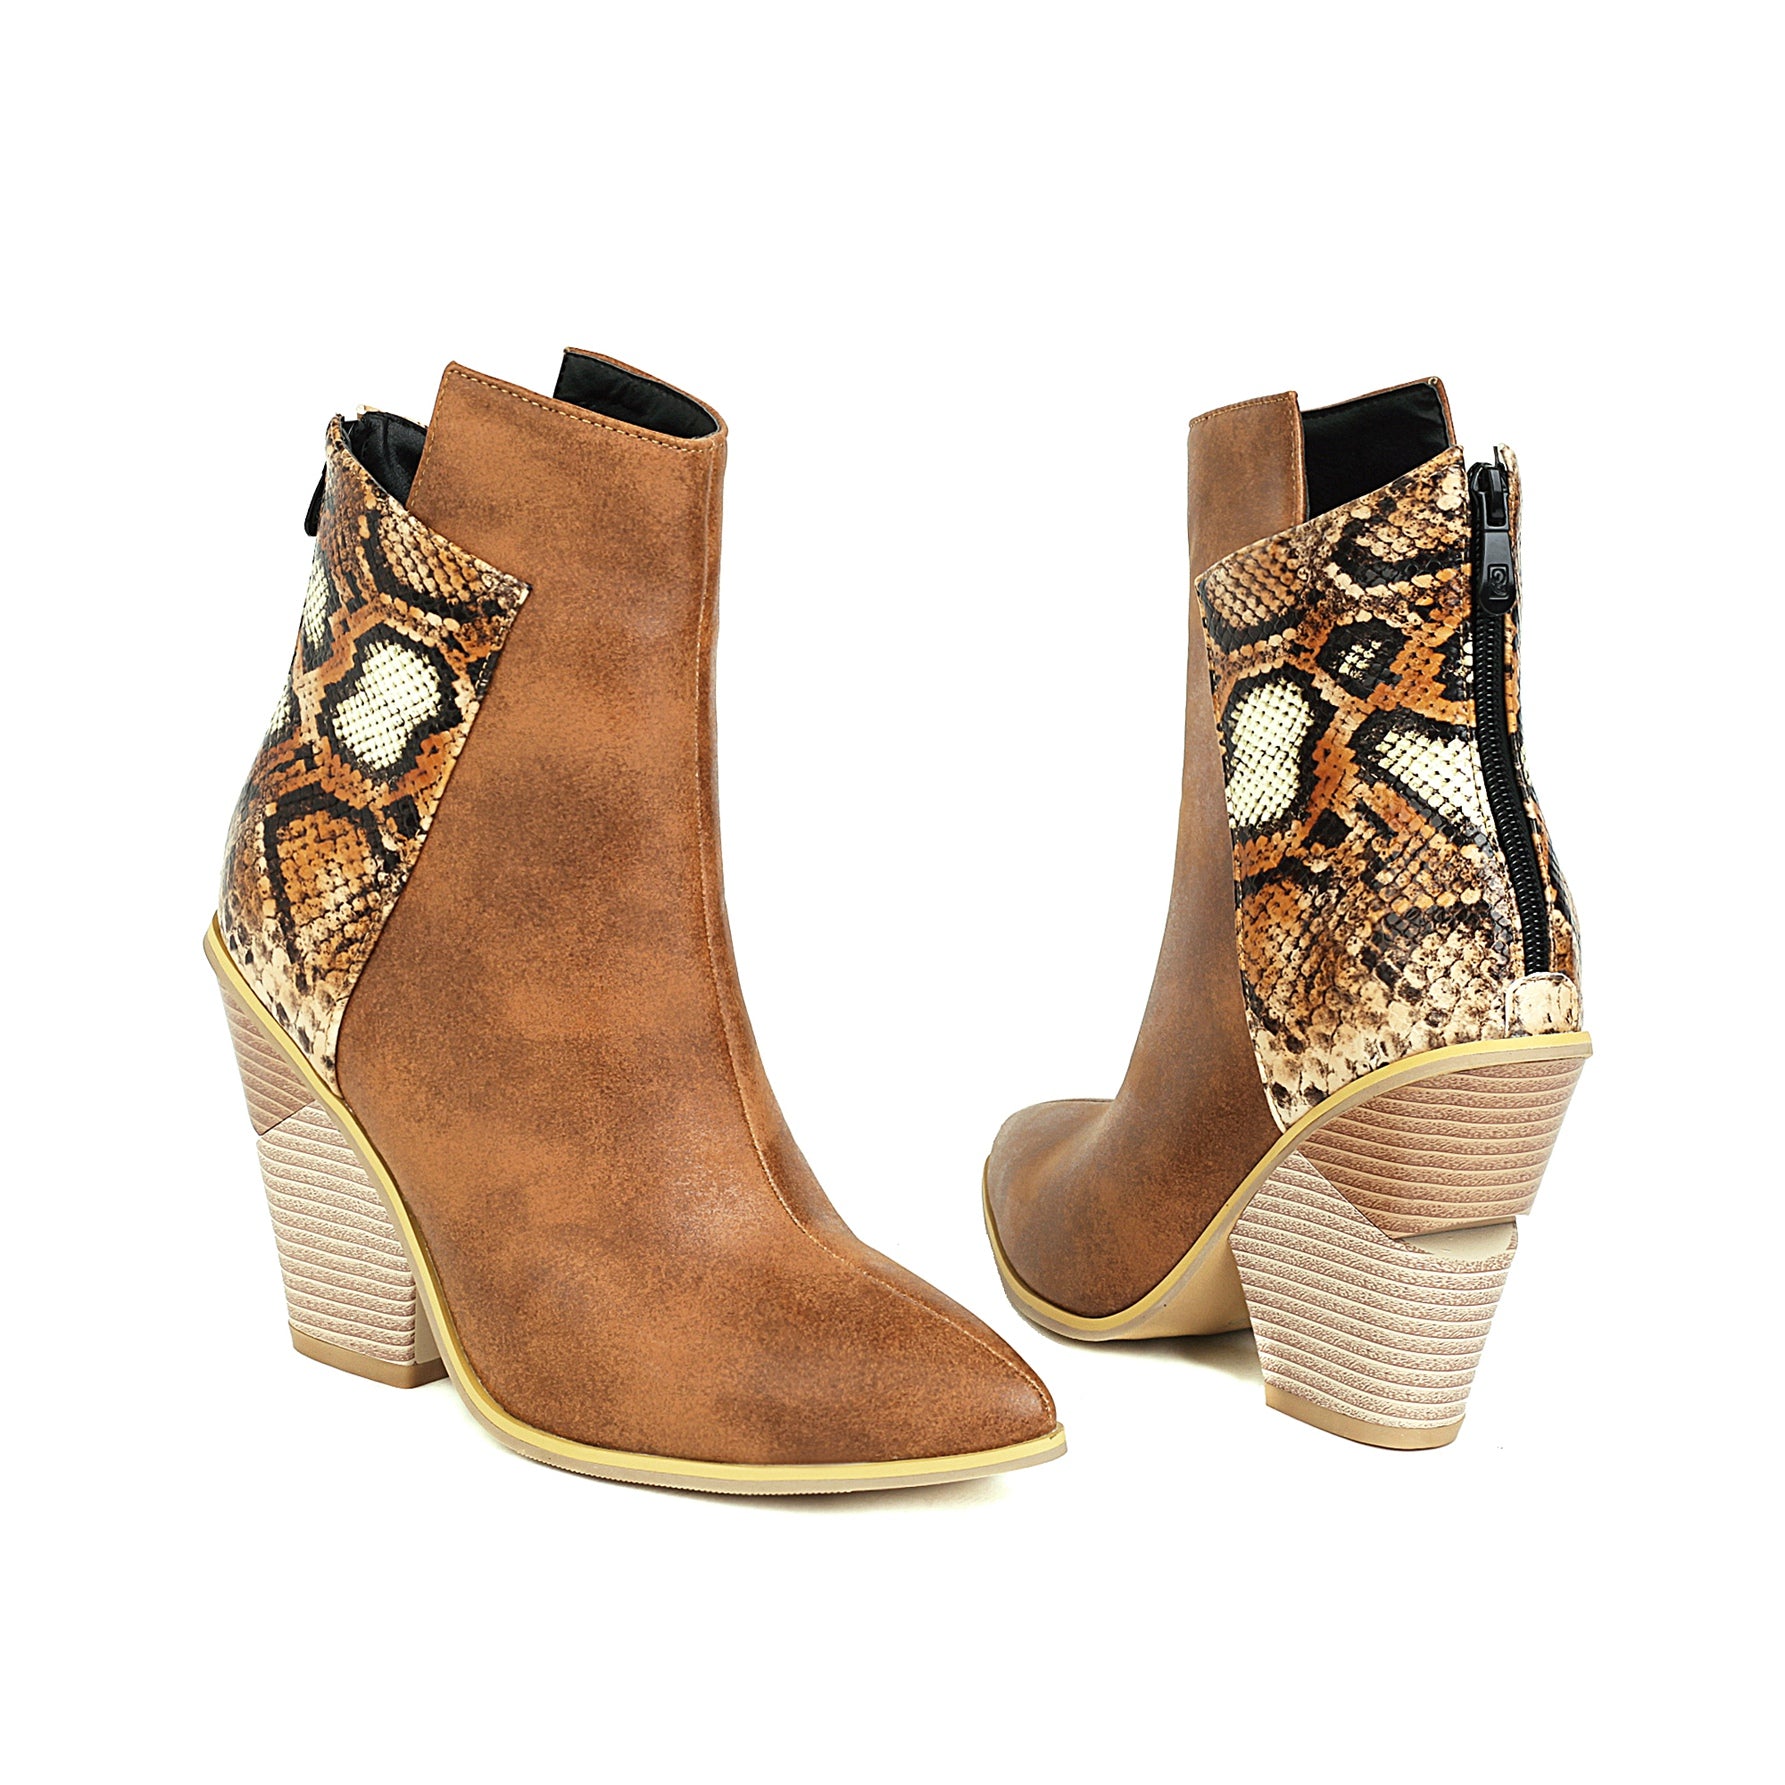 Bigsizeheels Pointed snakeskin print boots - Brown freeshipping - bigsizeheel®-size5-size15 -All Plus Sizes Available!